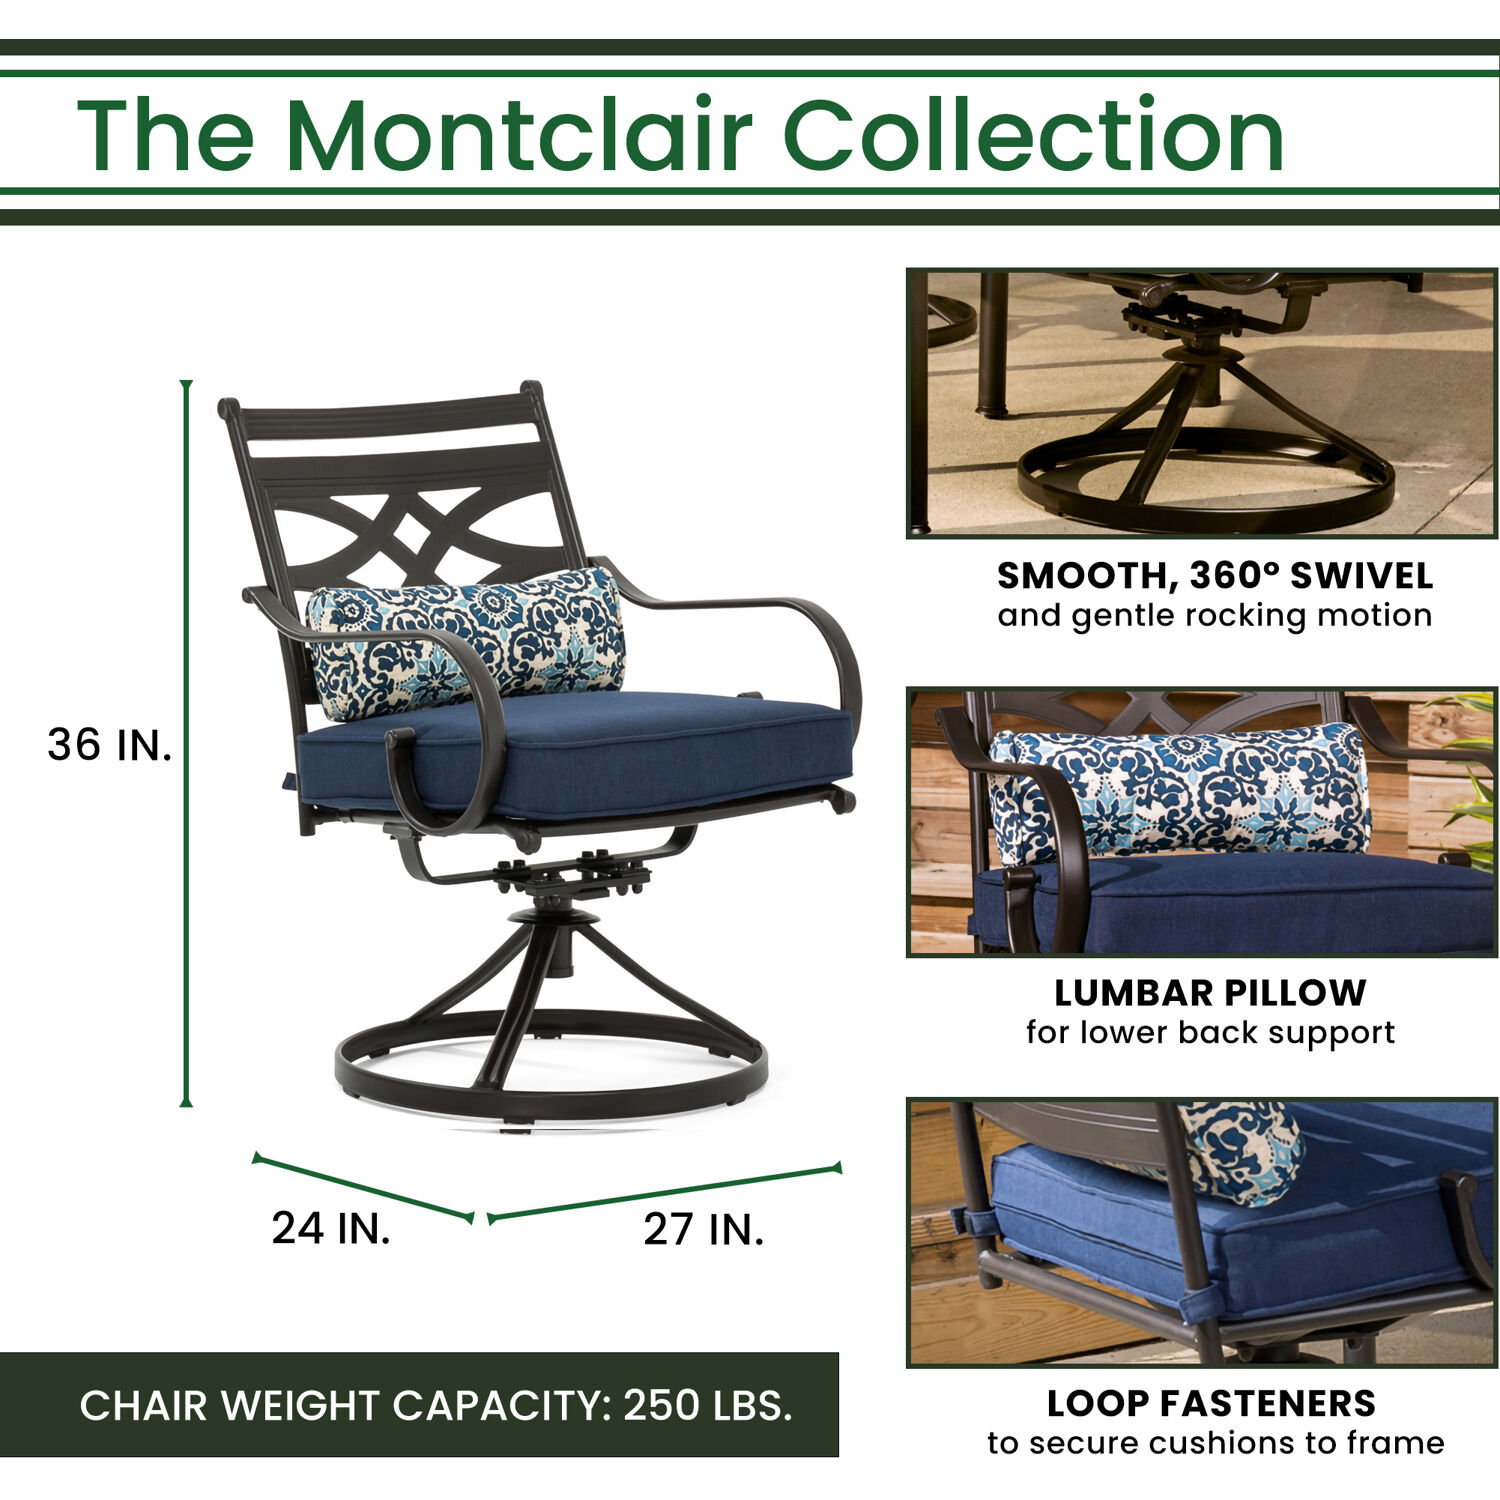 Hanover Montclair 5-Piece All-Weather Outdoor Patio Dining Set, 4 Swivel Rocker Chairs with Comfortable Seat and Lumbar Cushions, 40" Square Stamped Rectangle Table, Umbrella, and Base - image 3 of 14